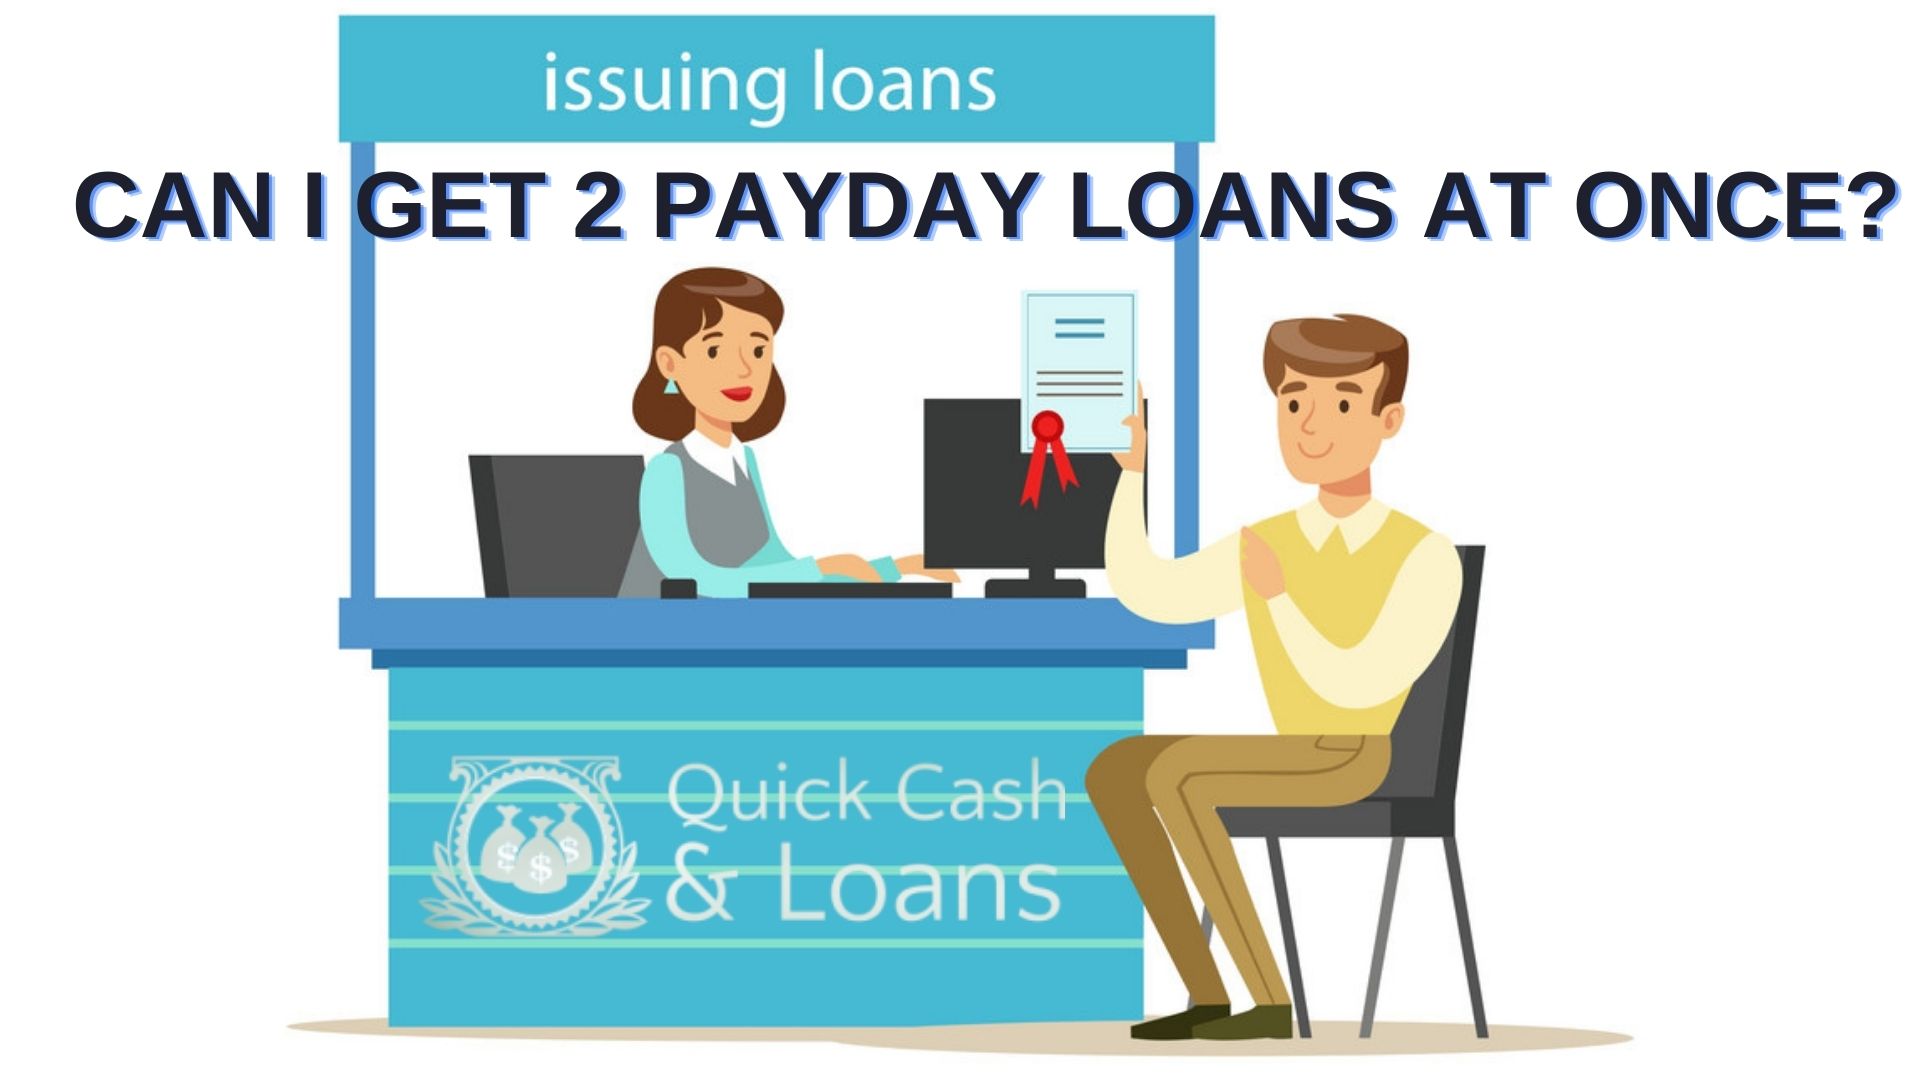 Can I Have 2 Payday Loans at Once?